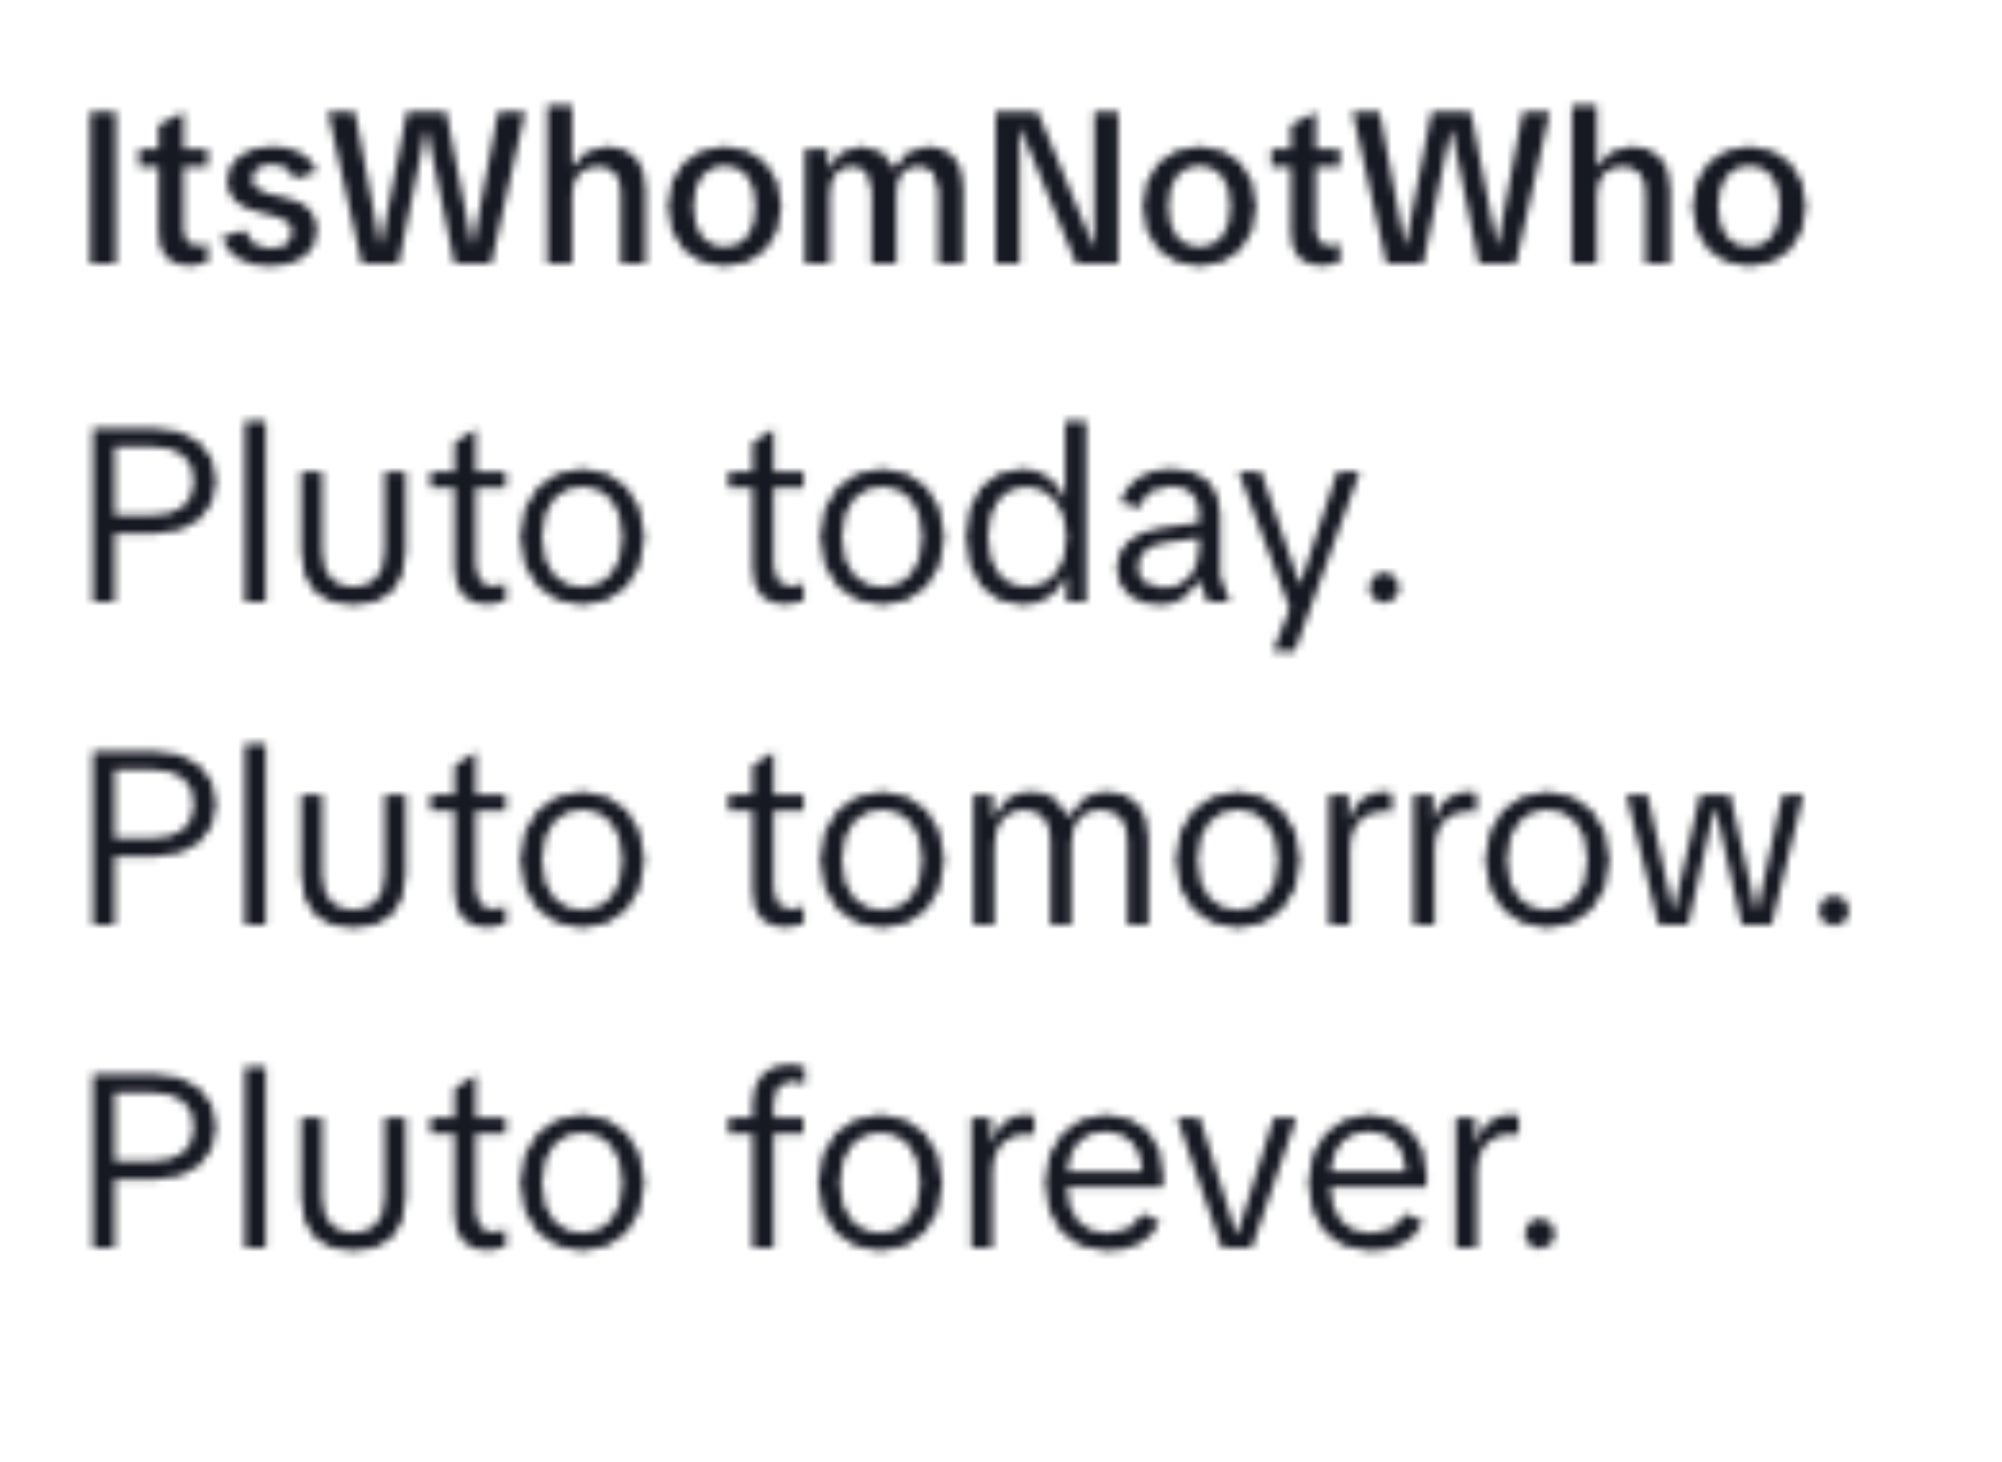 Summarized text: &quot;ItsWhomNotWho supports Pluto always, referencing today, tomorrow, and forever&quot;